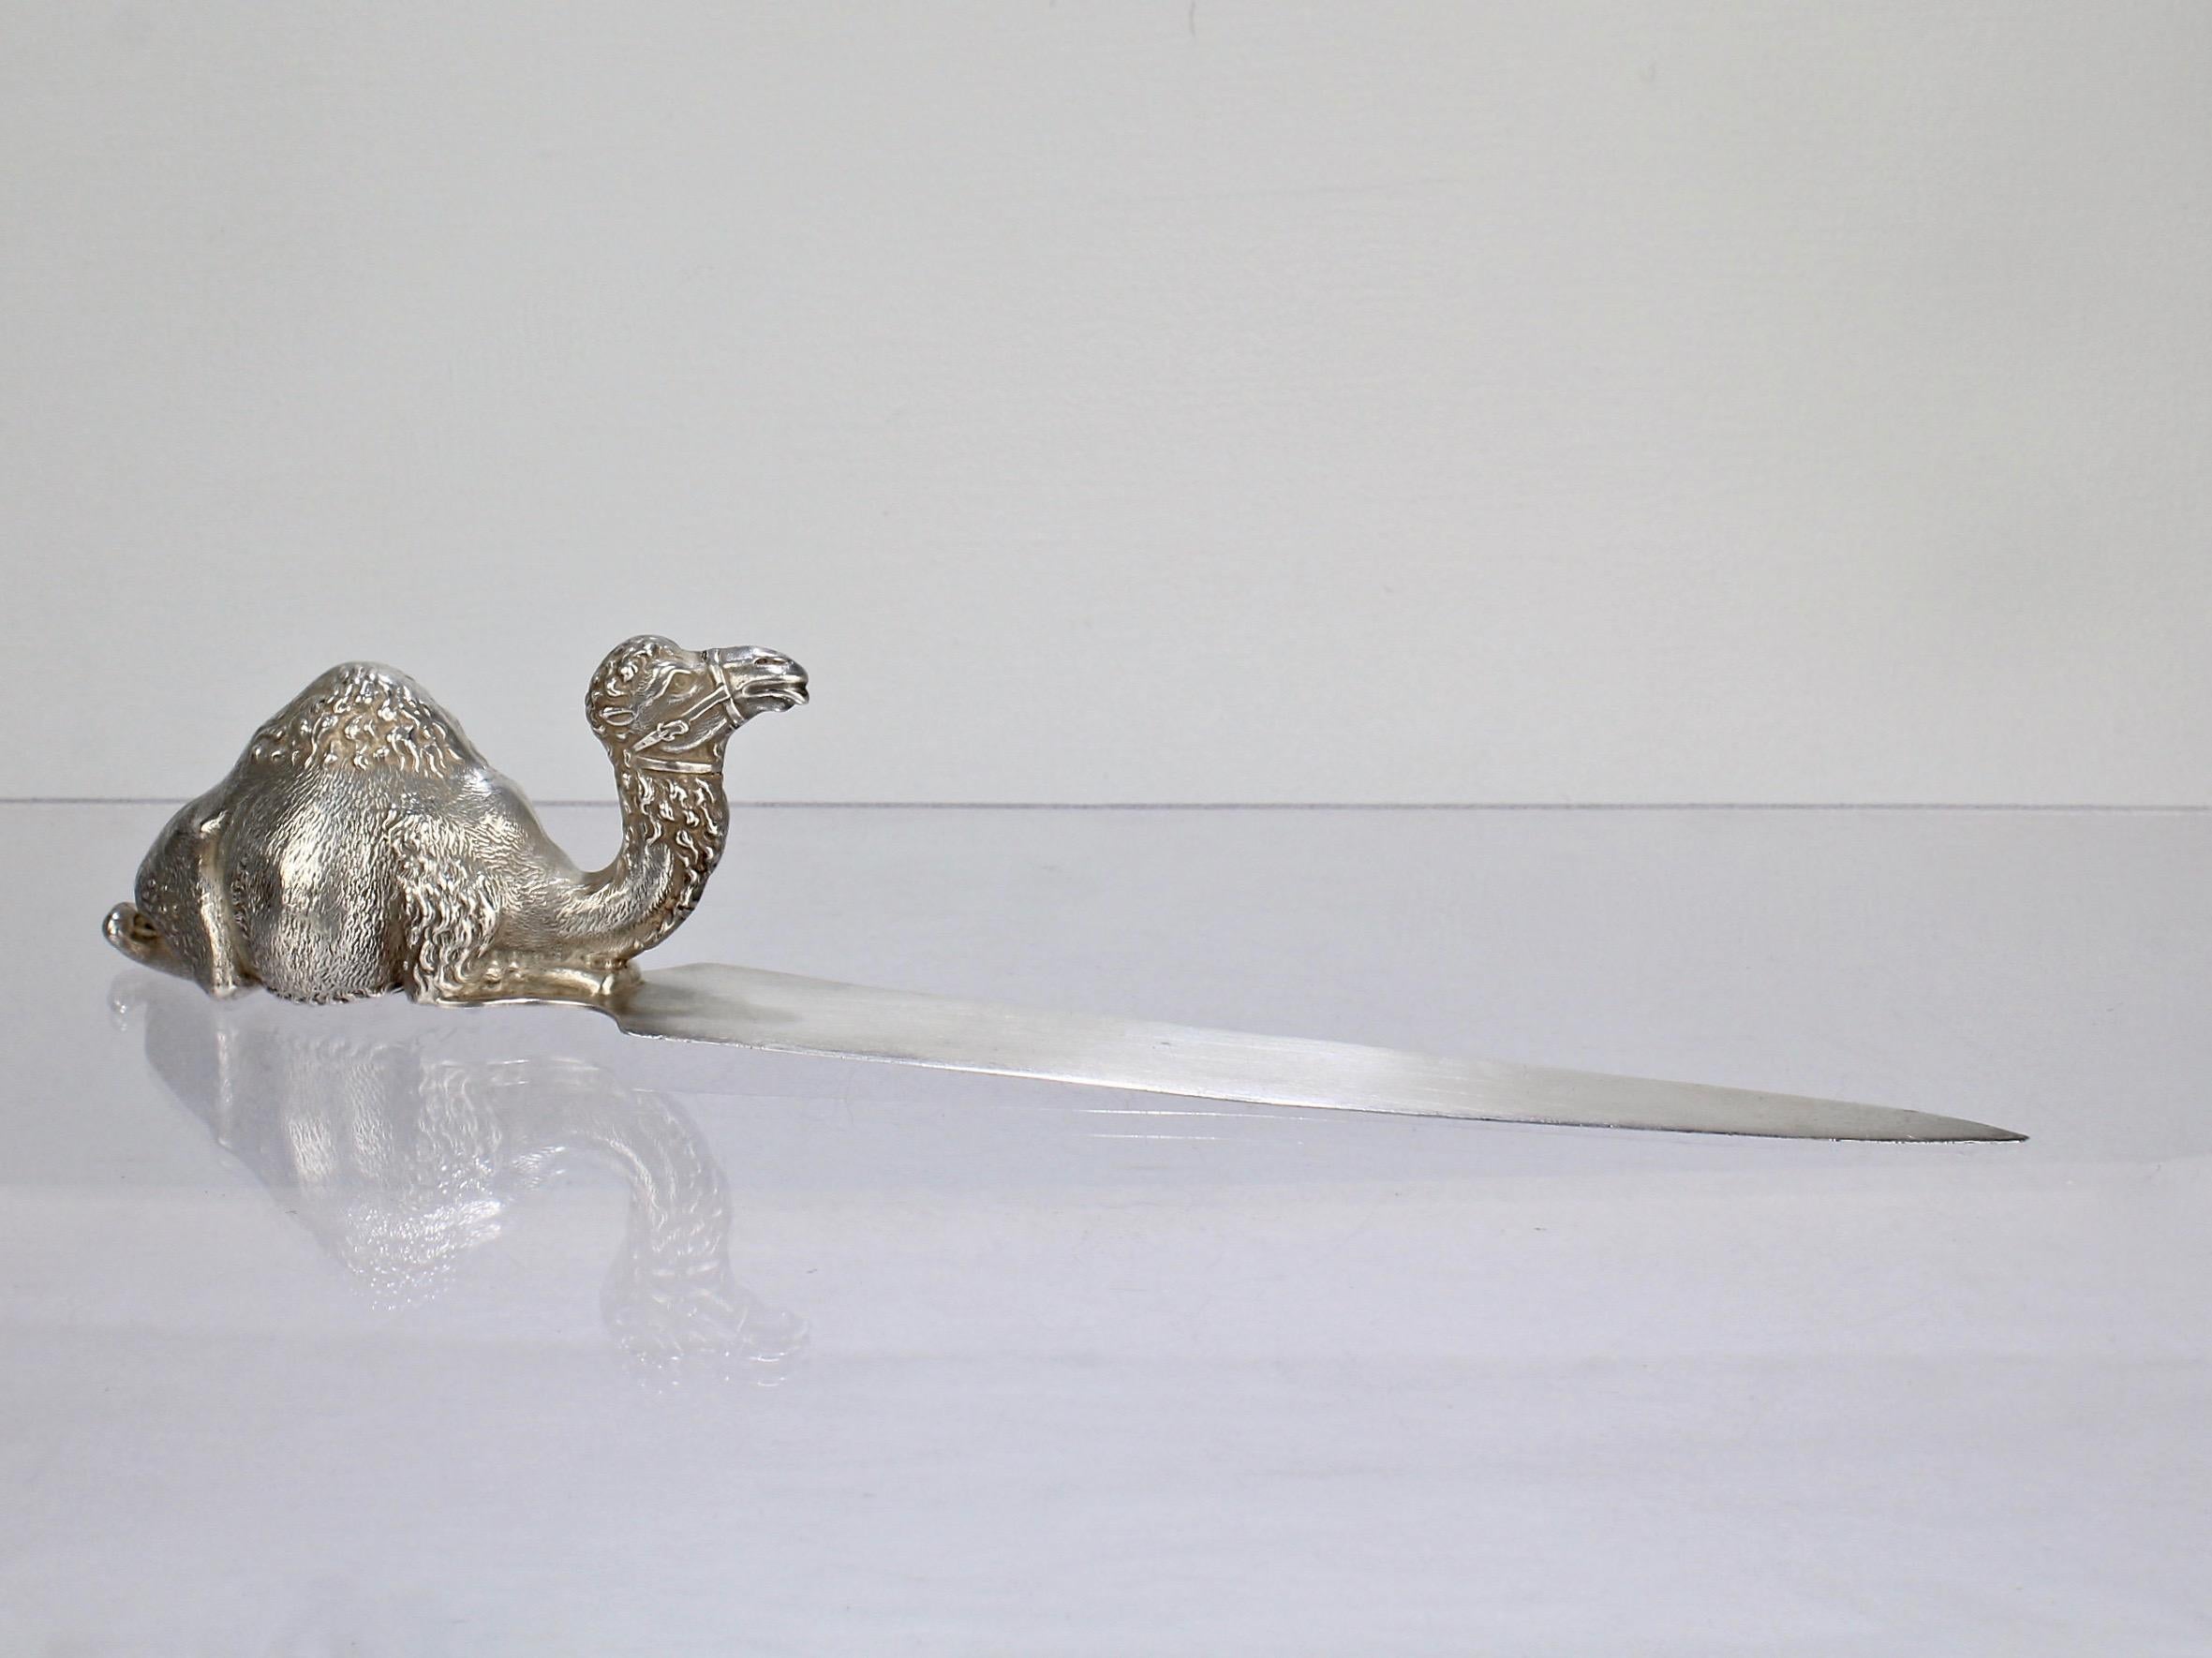 A wonderful figural sterling silver letter in the form of a one hump camel.  

The camel wears a wry expression on its face and has a finely detailed, sculptural quality.   

This is one of line of several very high quality camel items that H A Cary